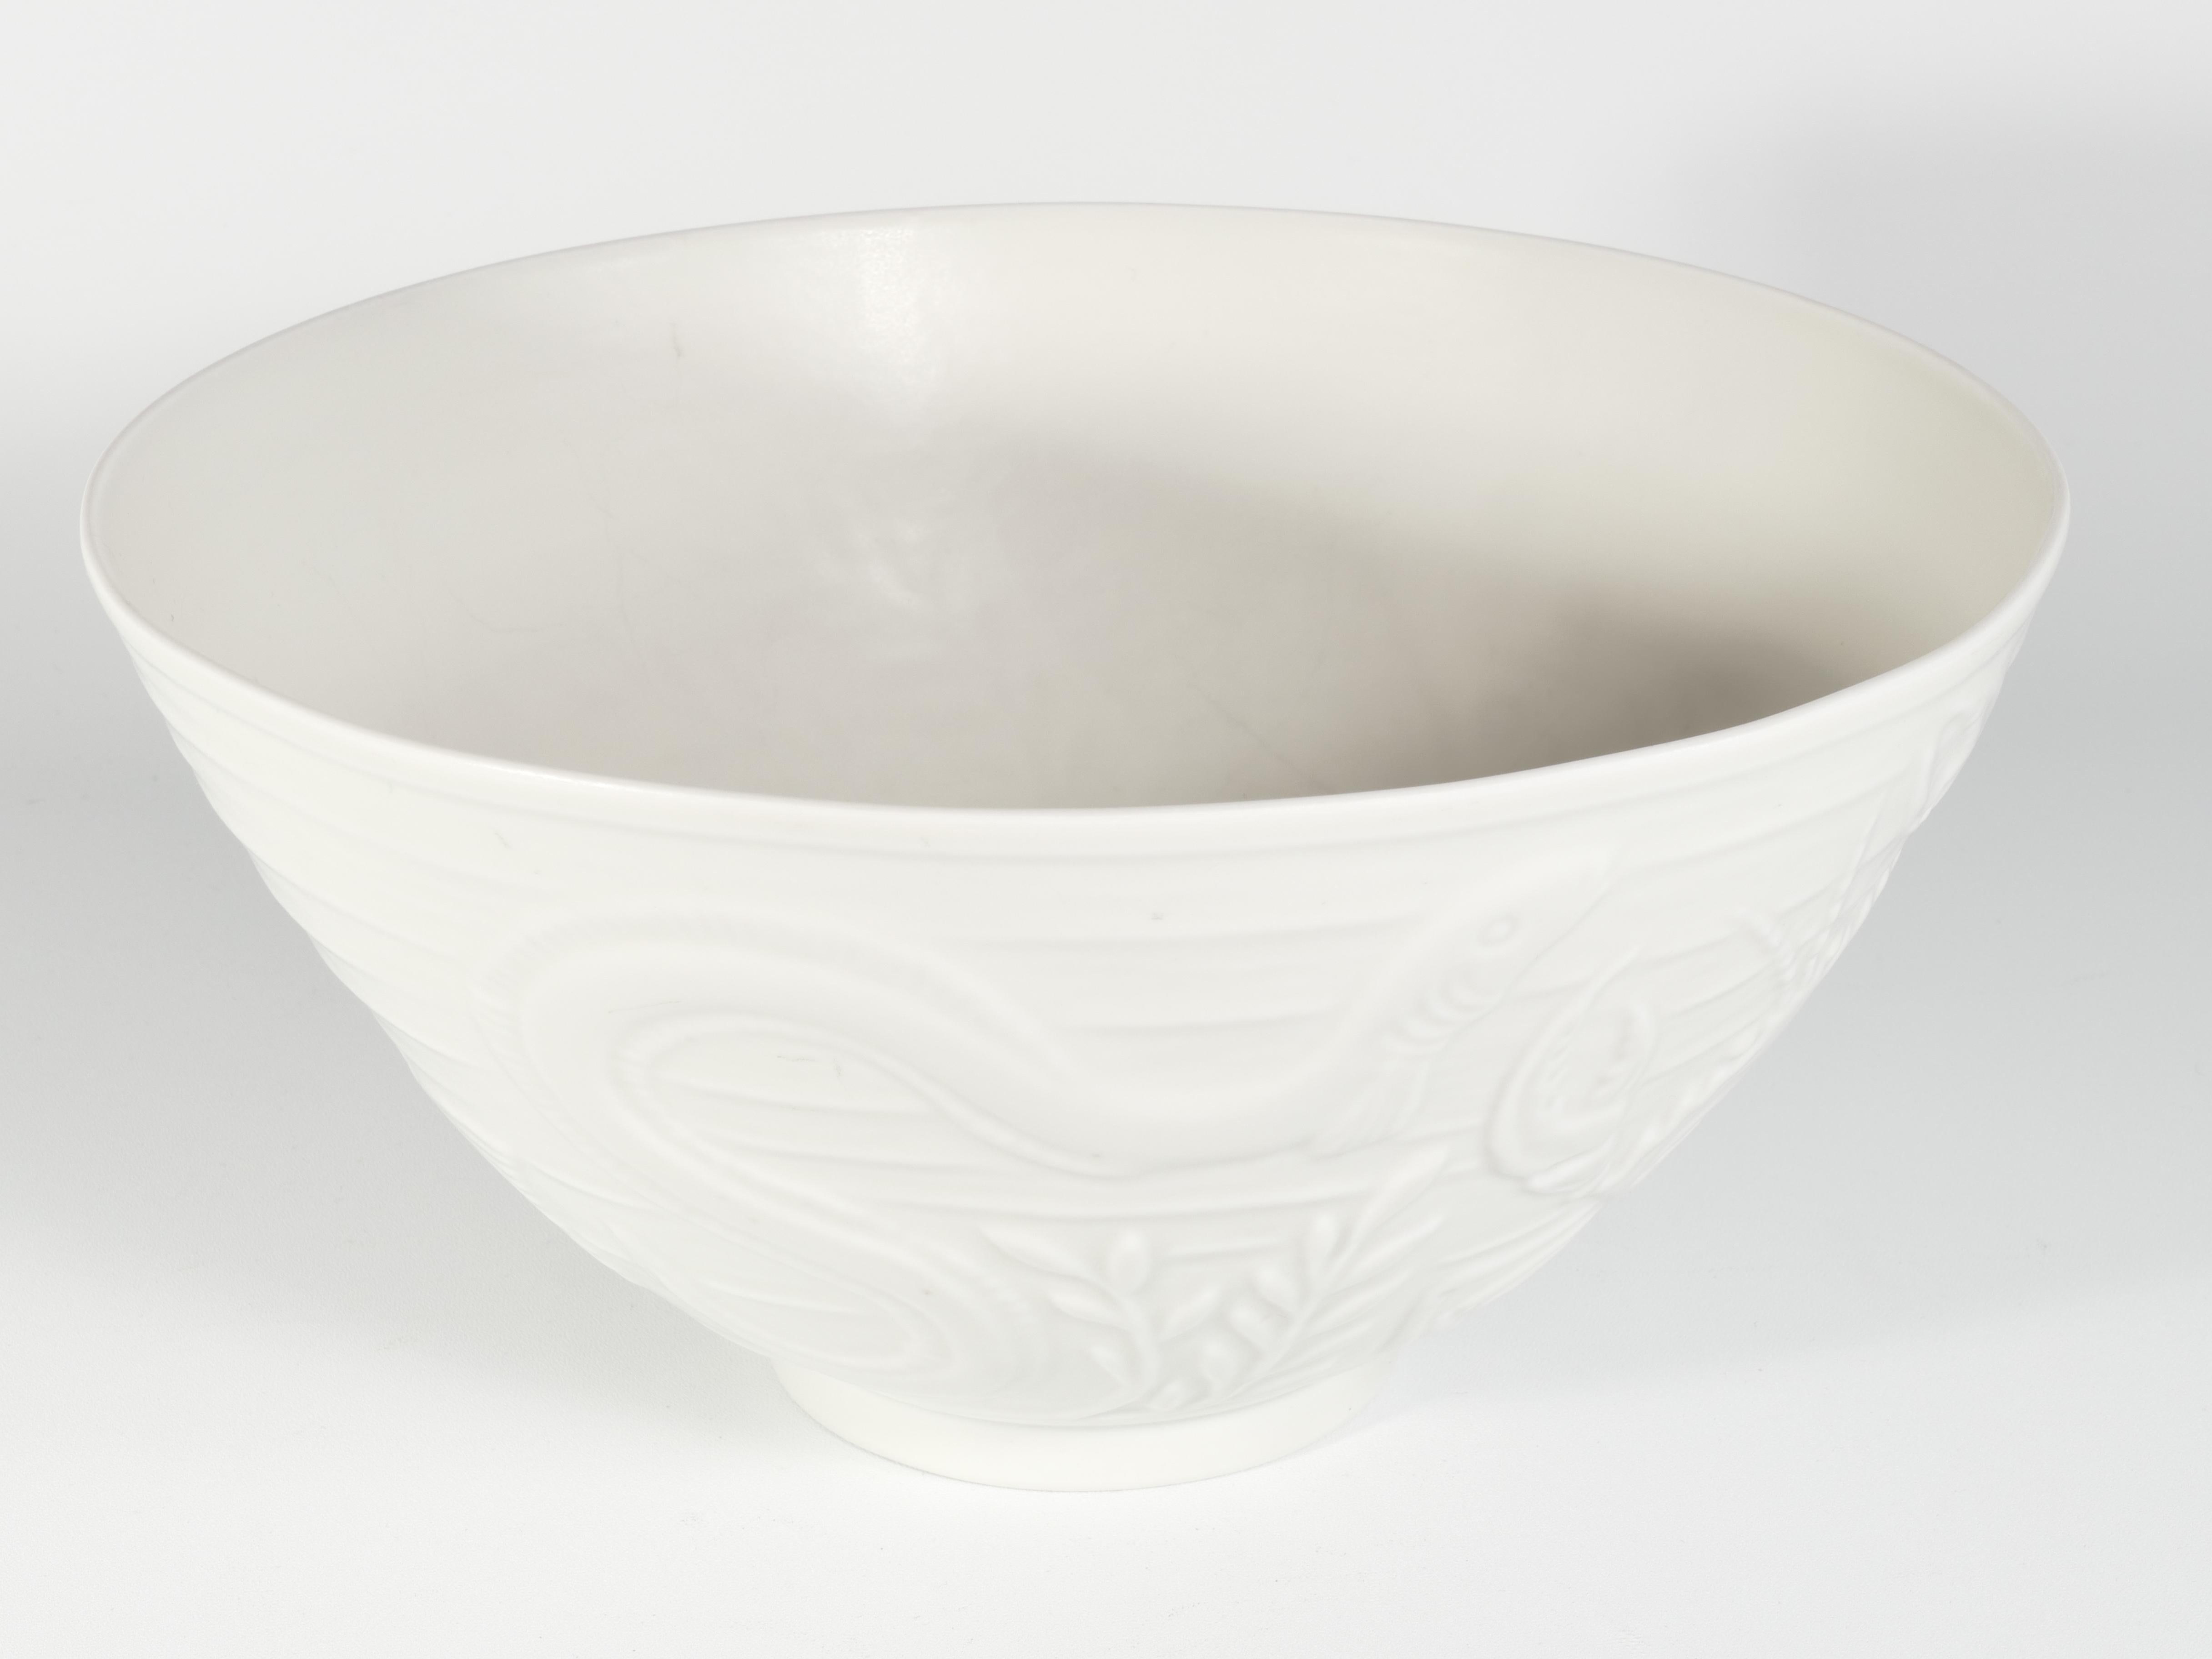 Swedish Grace White Porcelain Sea Themed  Bowl by Gunnar Nylund for ALP, 1940's For Sale 6